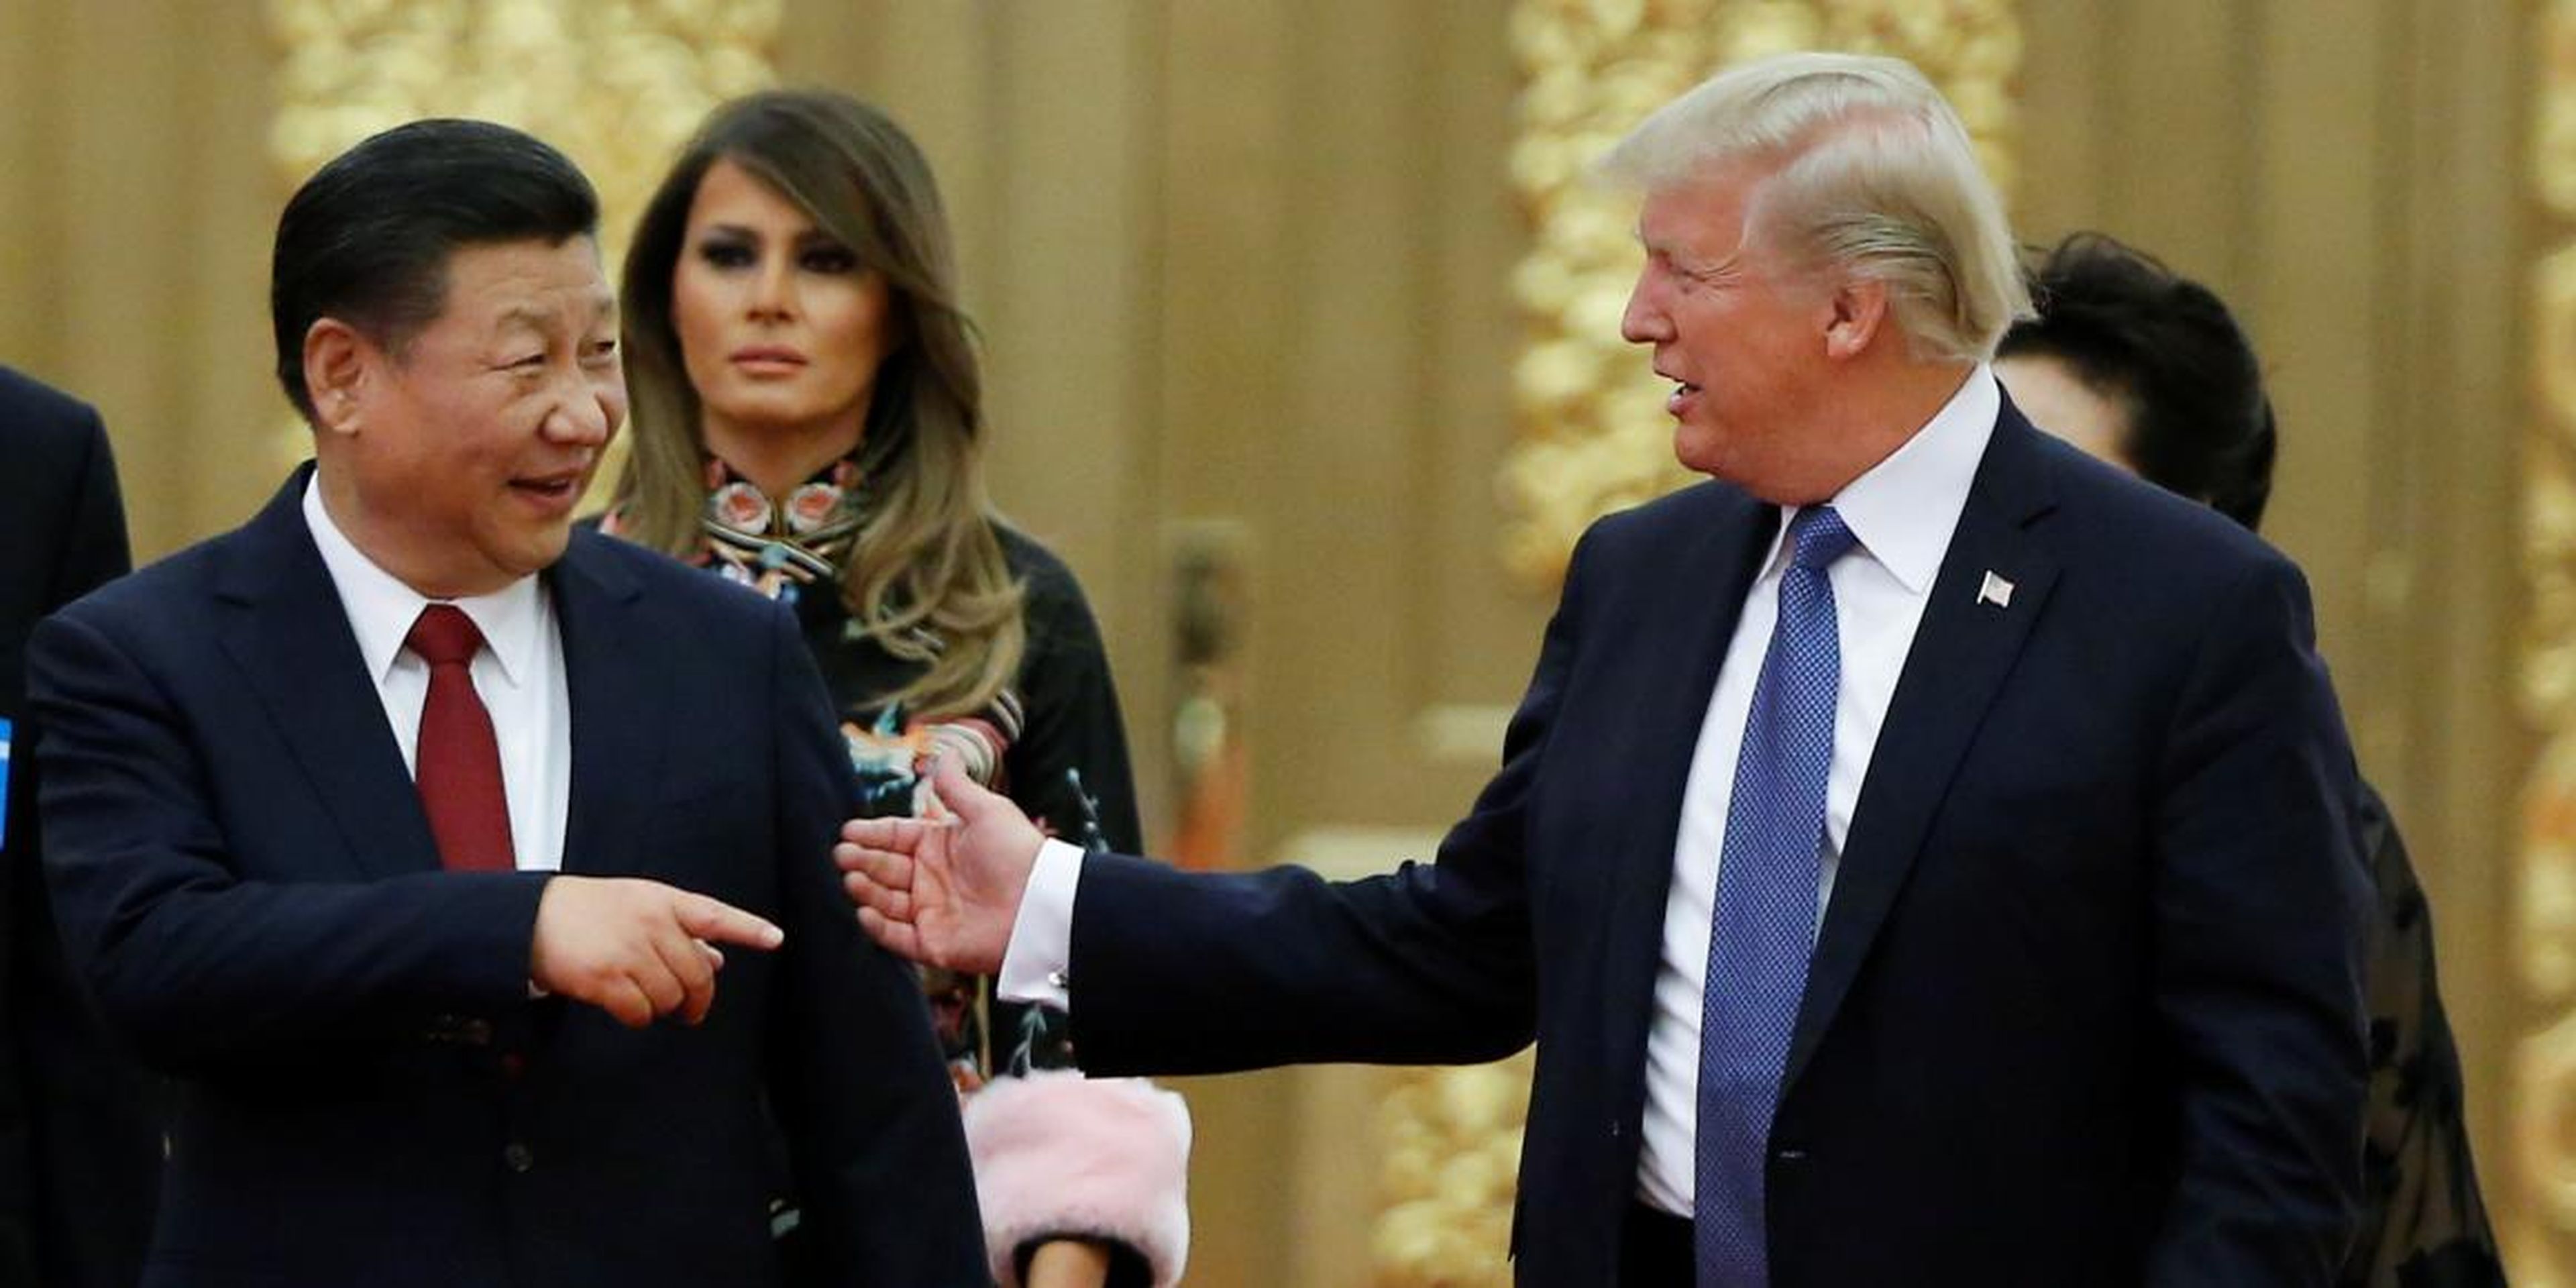 China is ramping up trade-war tensions after Trump's tariff threat, saying it will 'fight to the end'